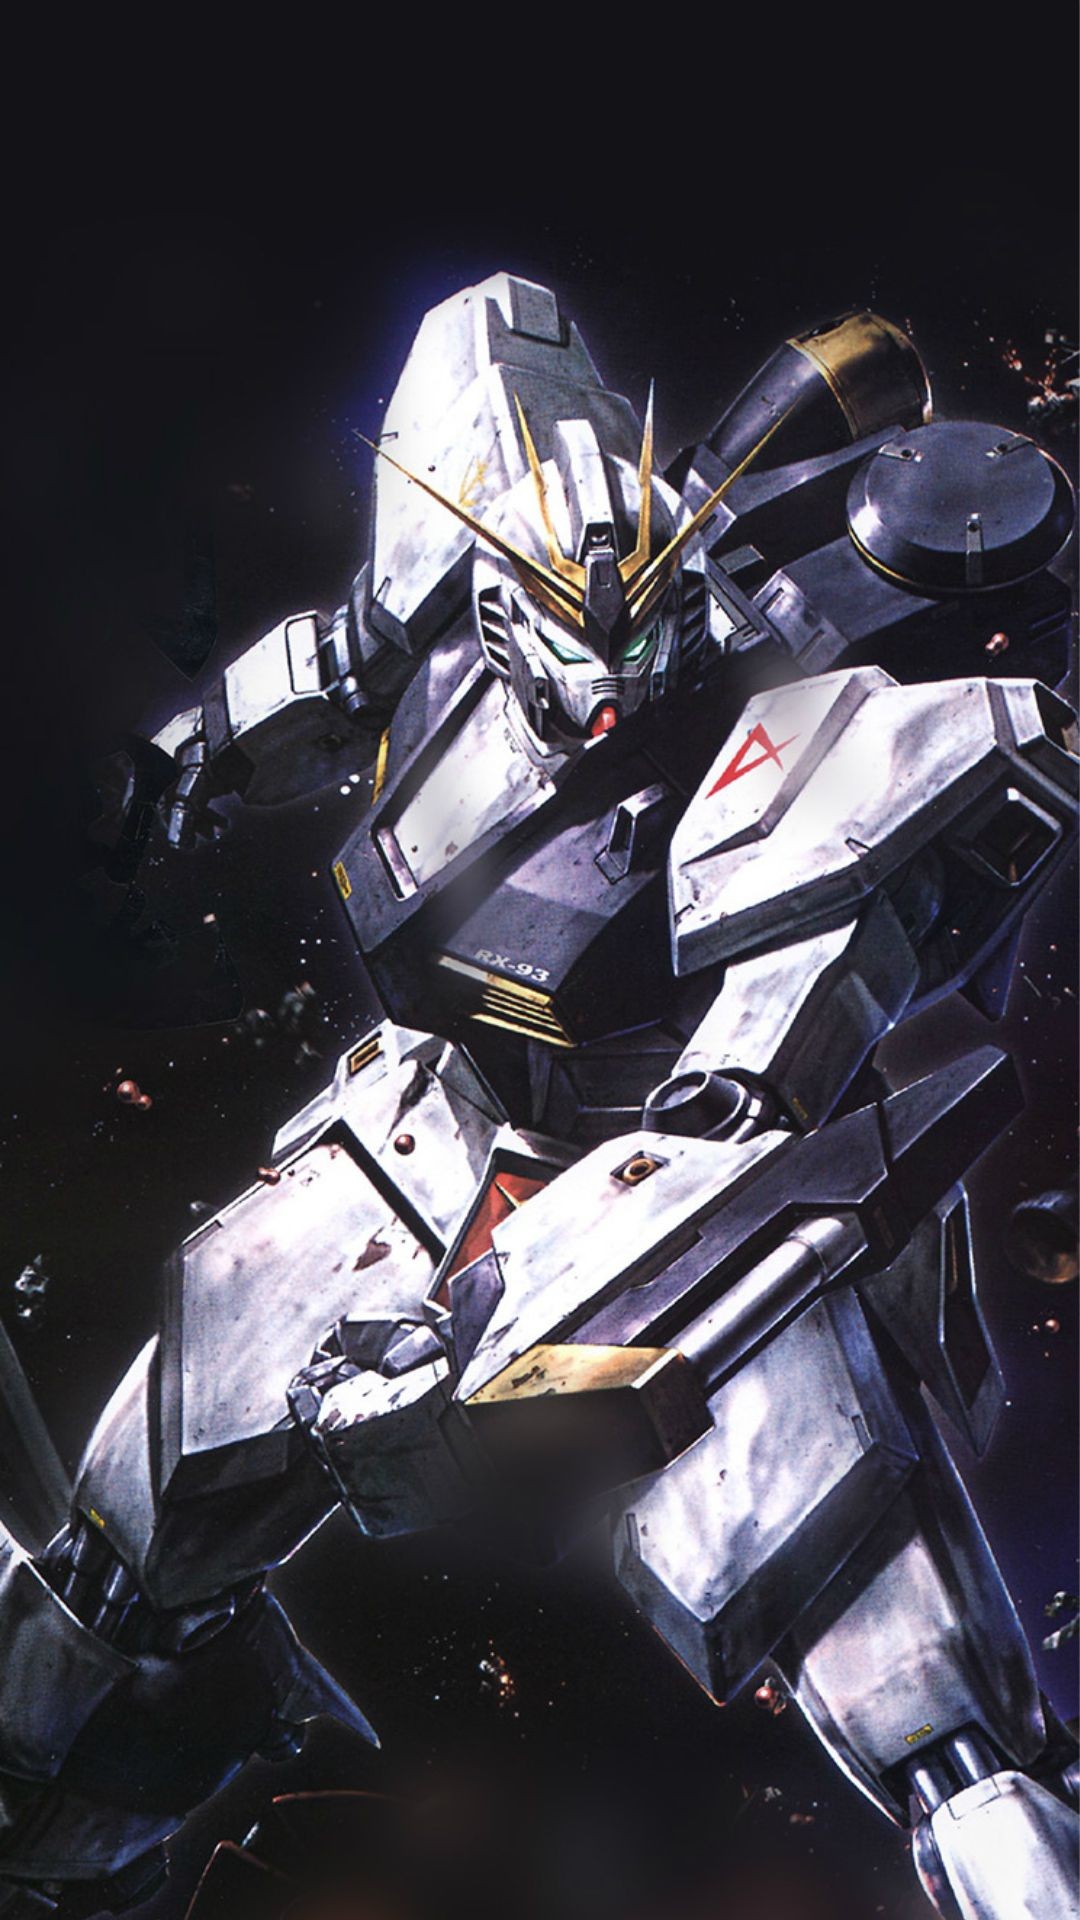 Gundam HD Wallpapers For Android With high-resolution 1080X1920 pixel. You can use this wallpaper for your Android backgrounds, Tablet, Samsung Screensavers, Mobile Phone Lock Screen and another Smartphones device